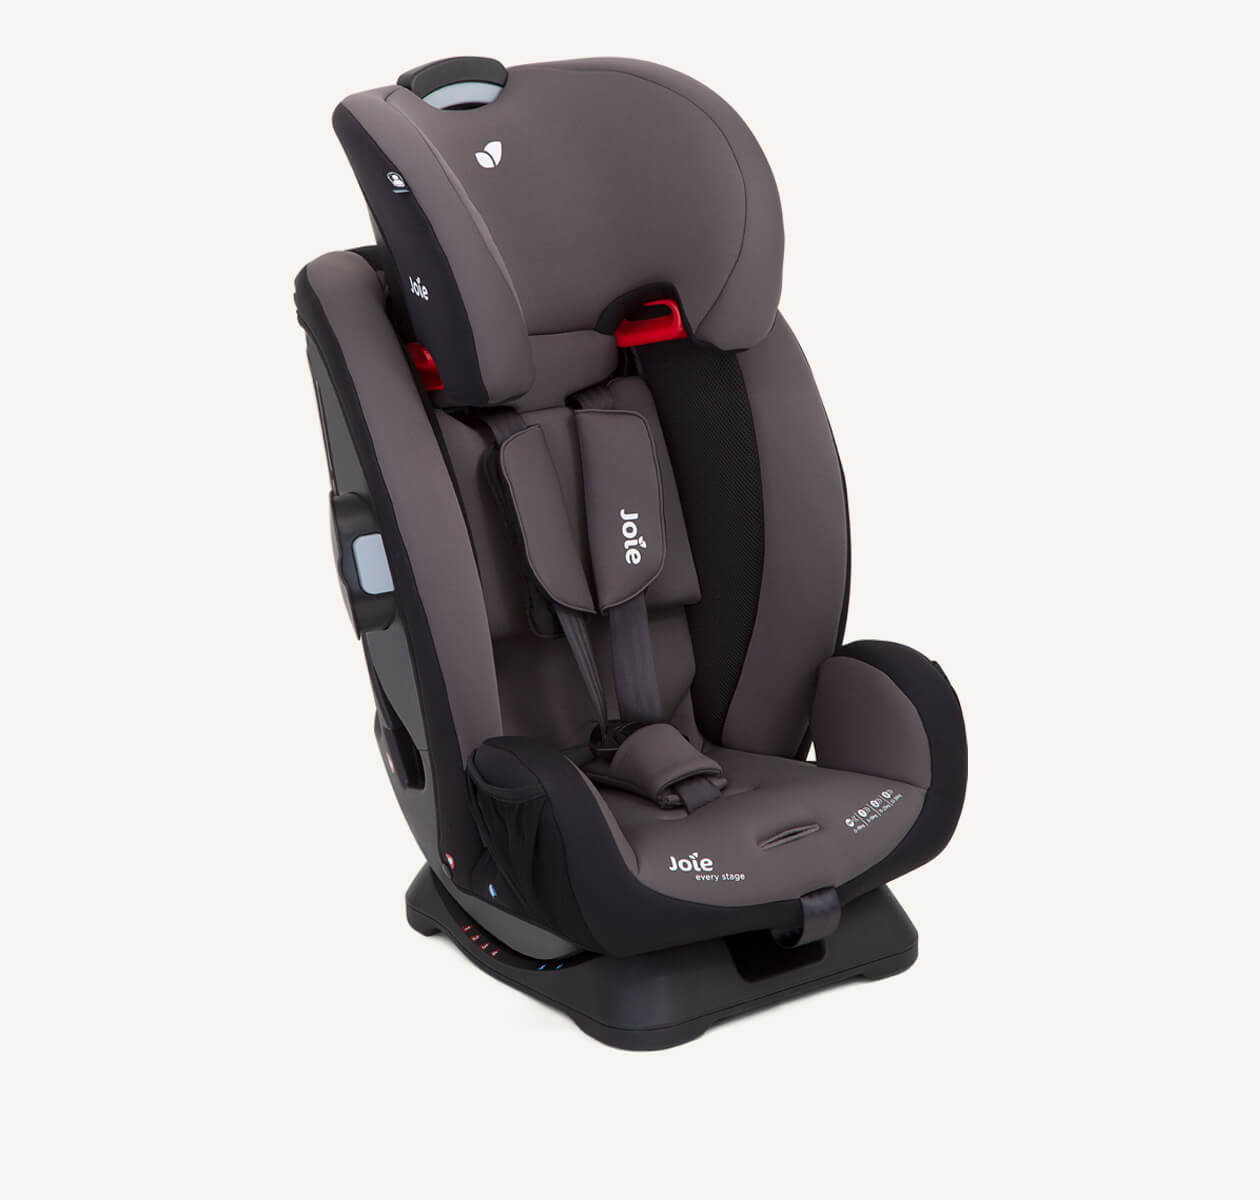 Joie Every Stage child car seat